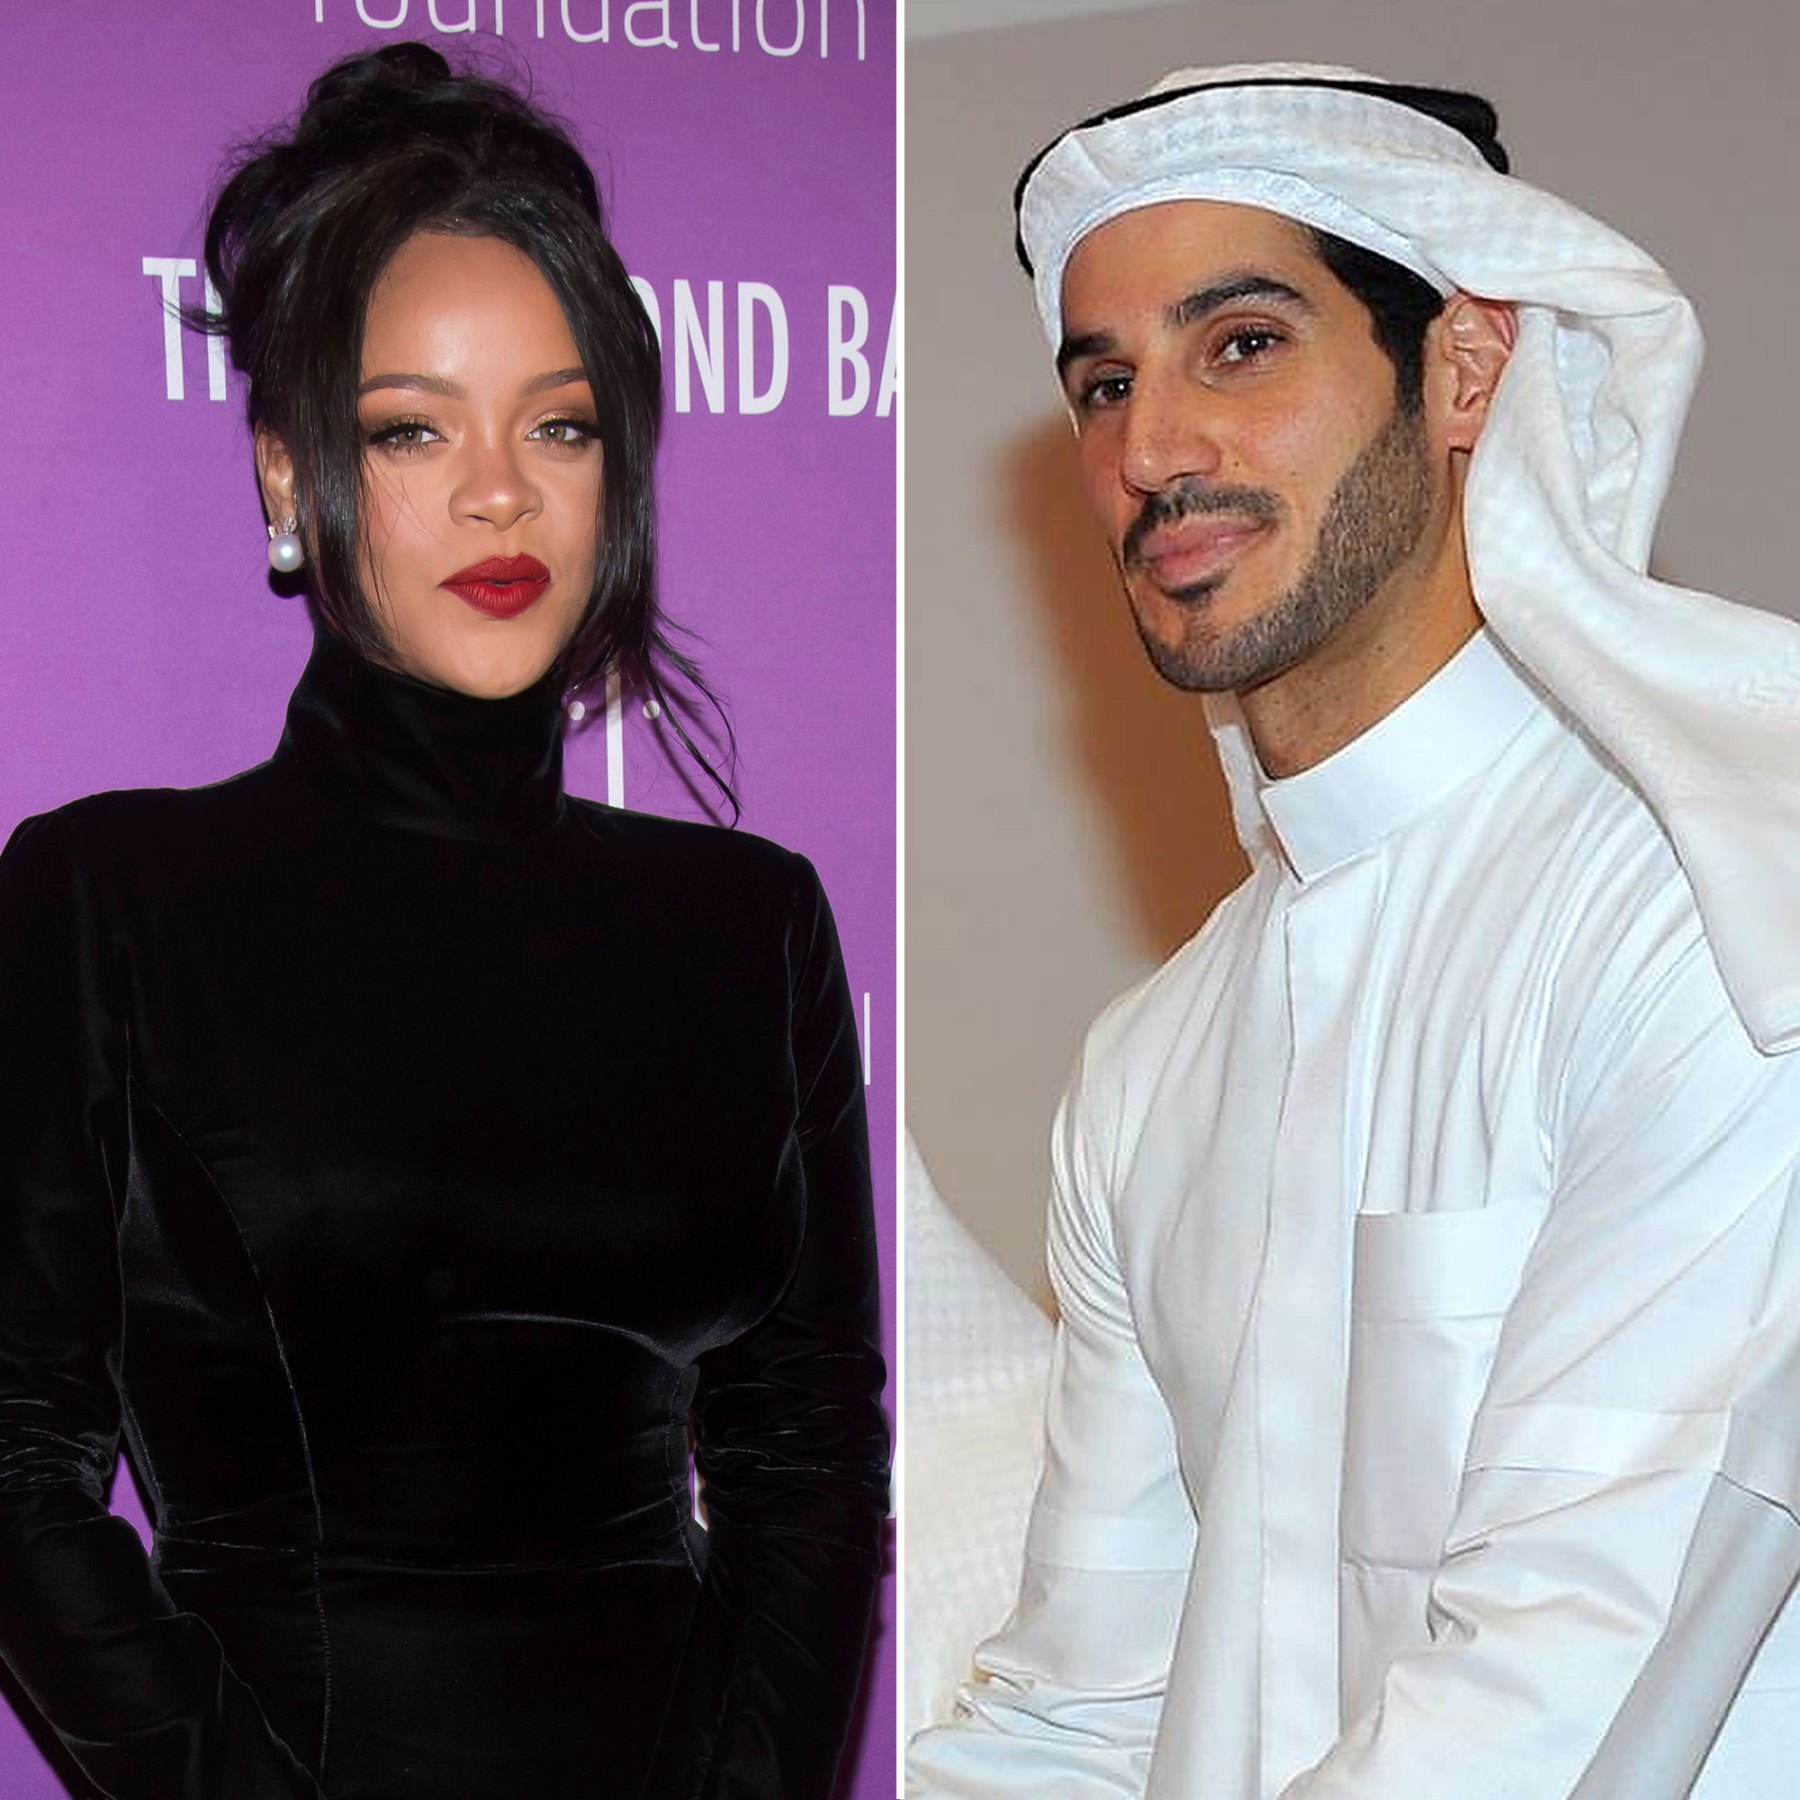 Rihanna's Boyfriend Hassan Jameel Is 'Very Smart' and 'Serious' UsWeekly